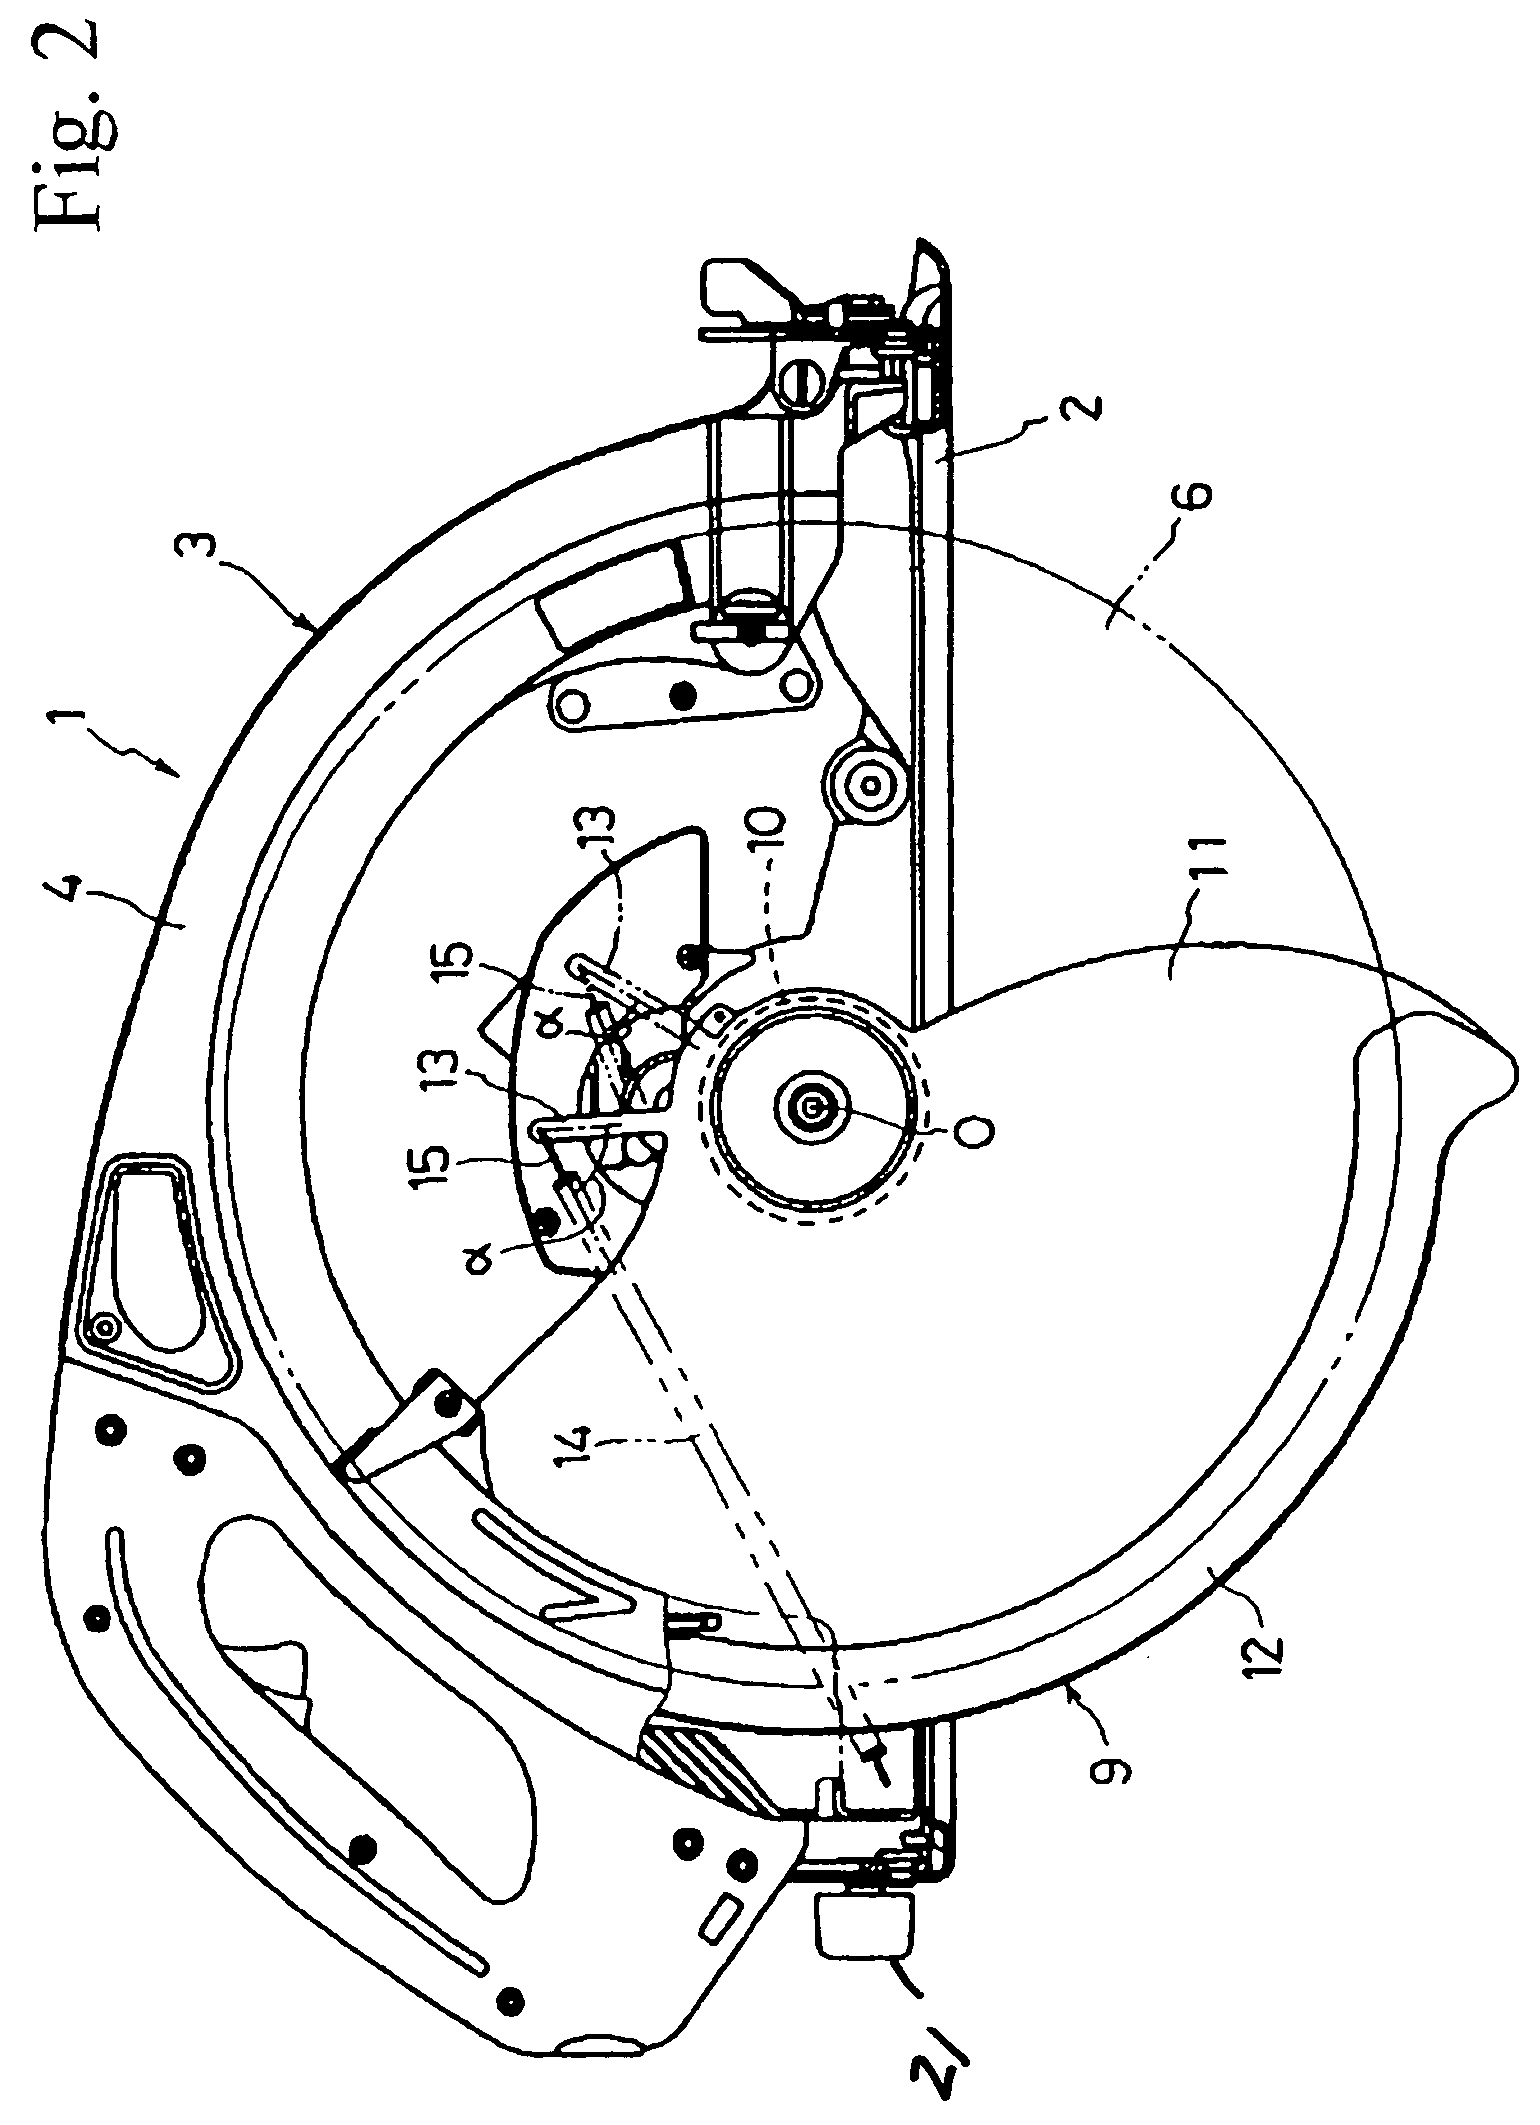 Circular saw with an improved lower blade guard